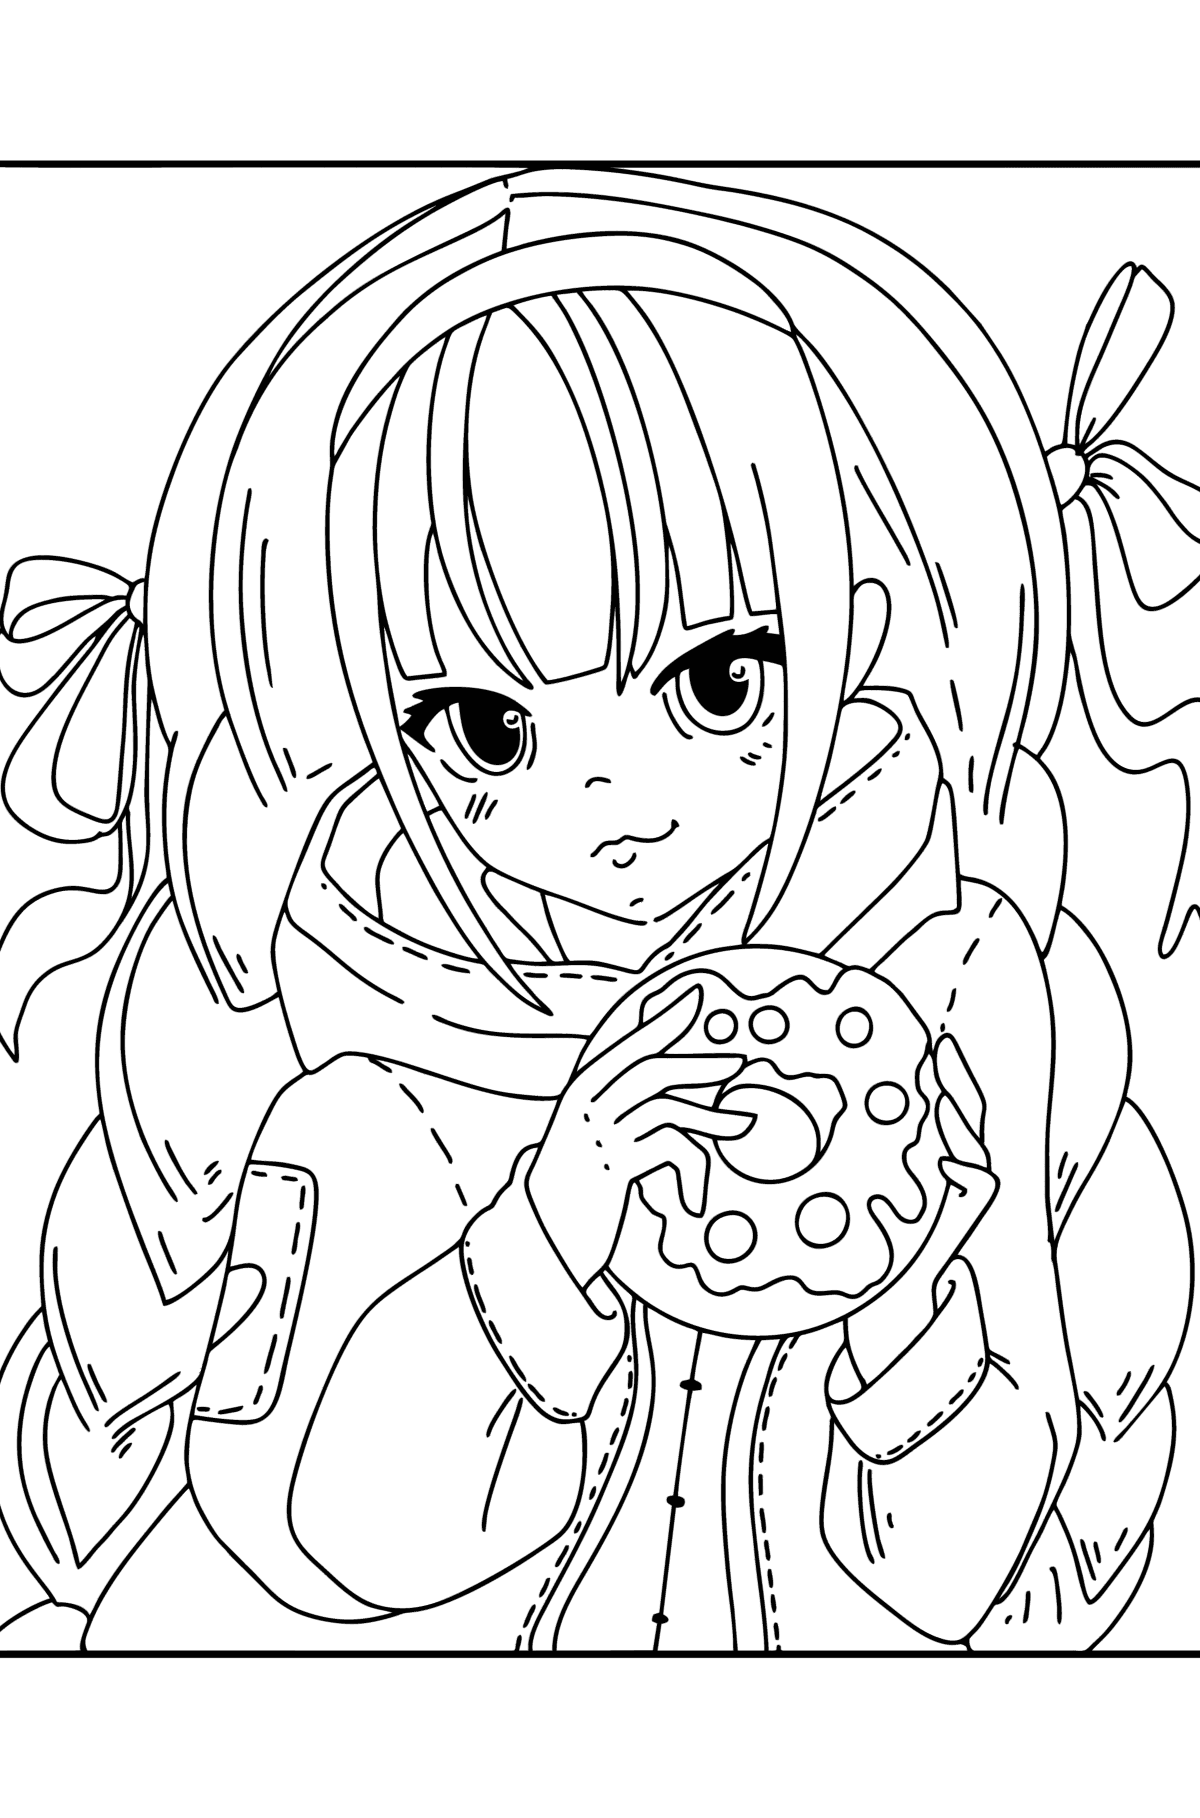 Japanese anime girl coloring page - Coloring Pages for Kids